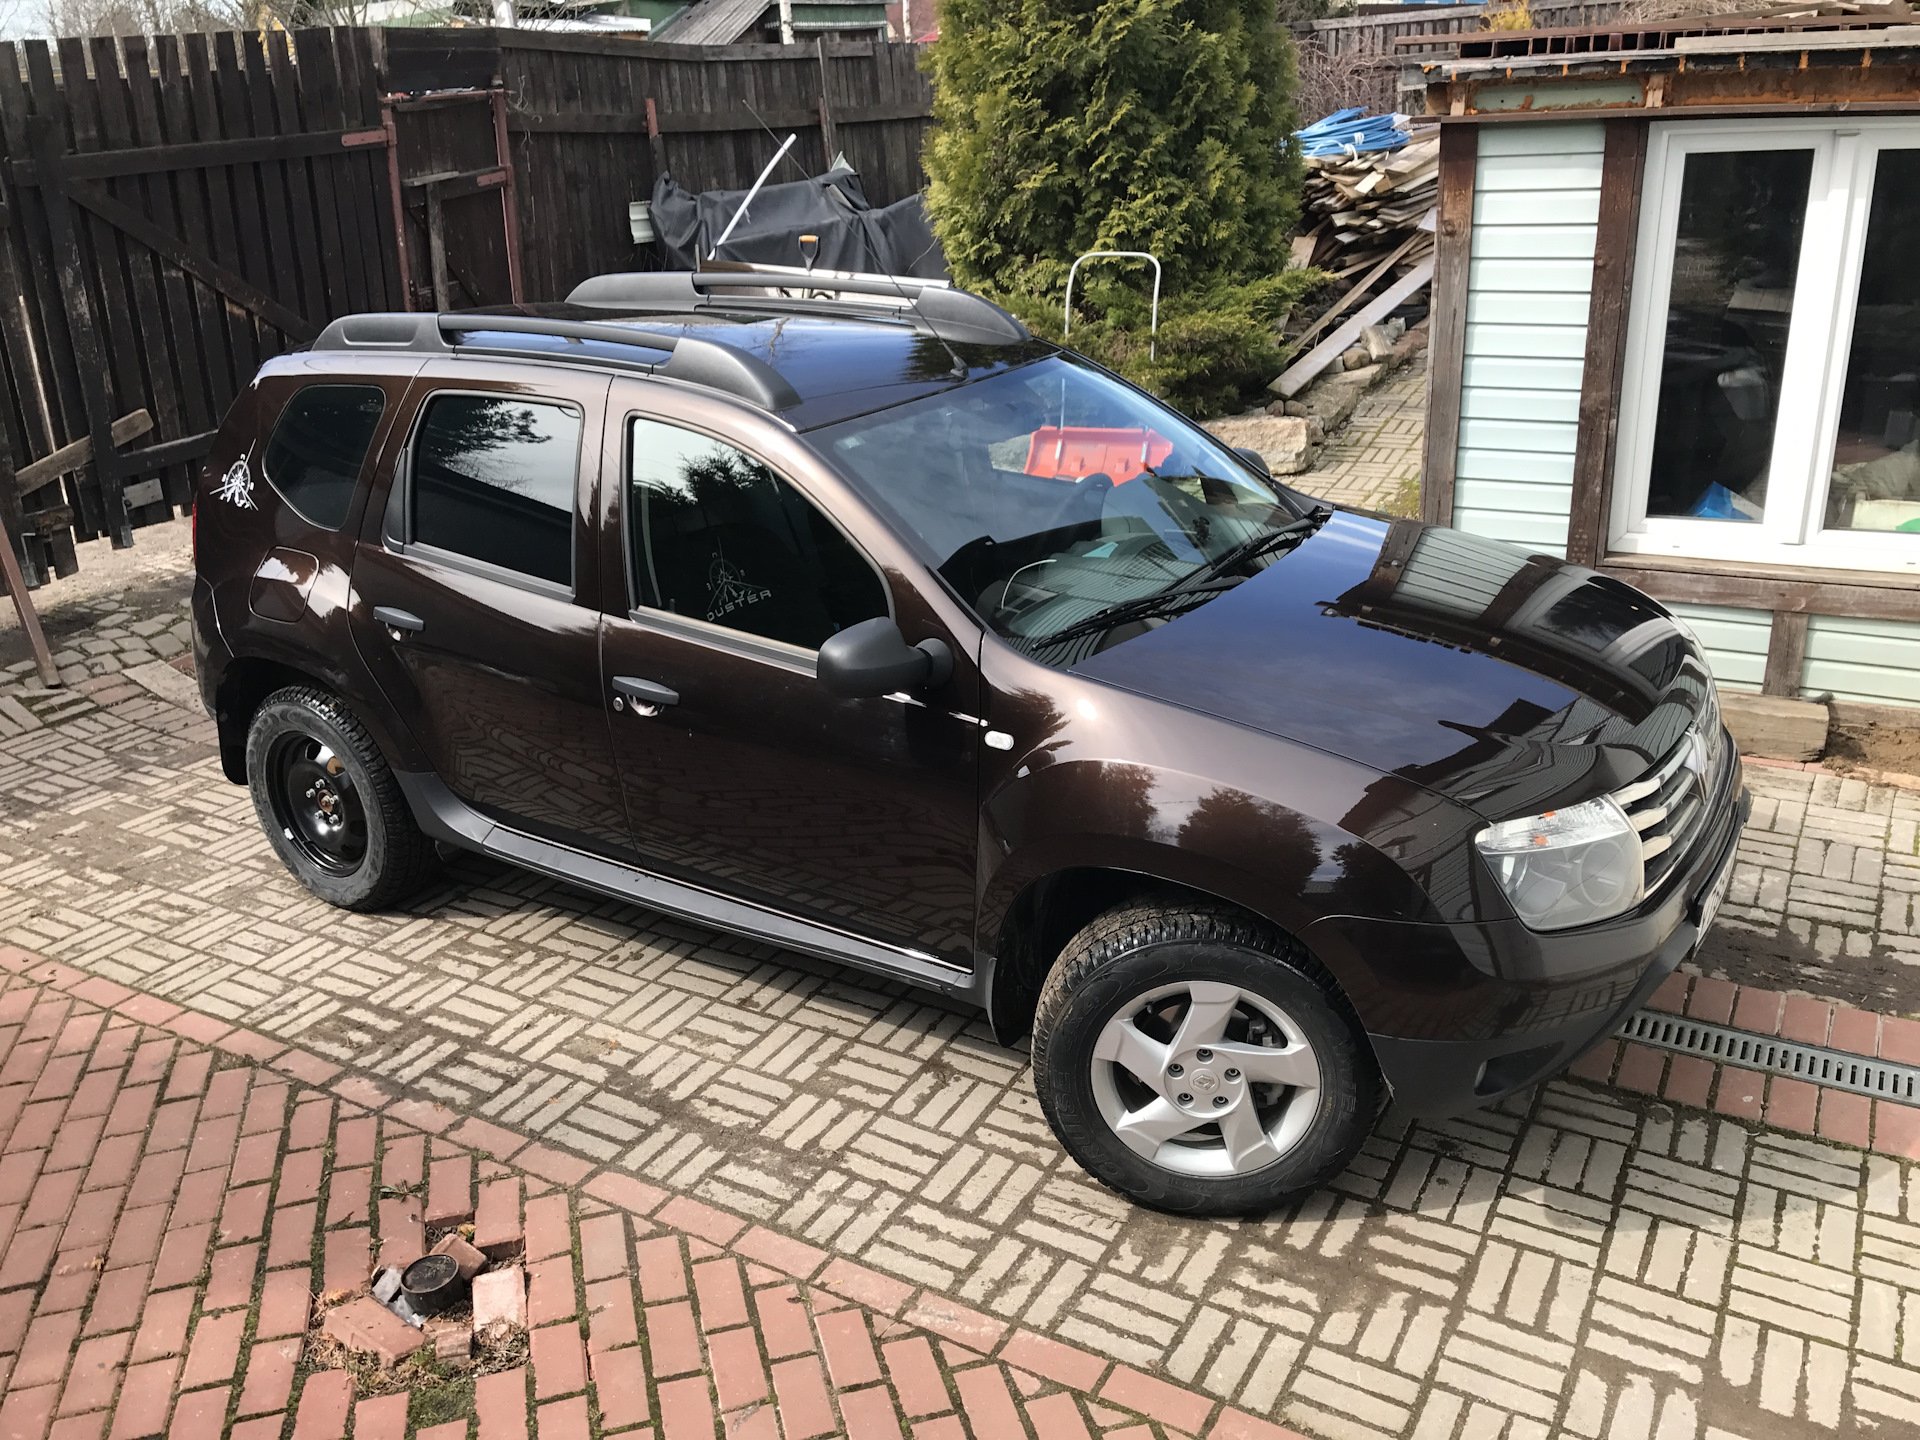 Рено дастер 2.0 4wd. Рено Дастер 4х4. Renault Duster 4. Рено Дастер 2.0 4х4. Renault Duster 2015.